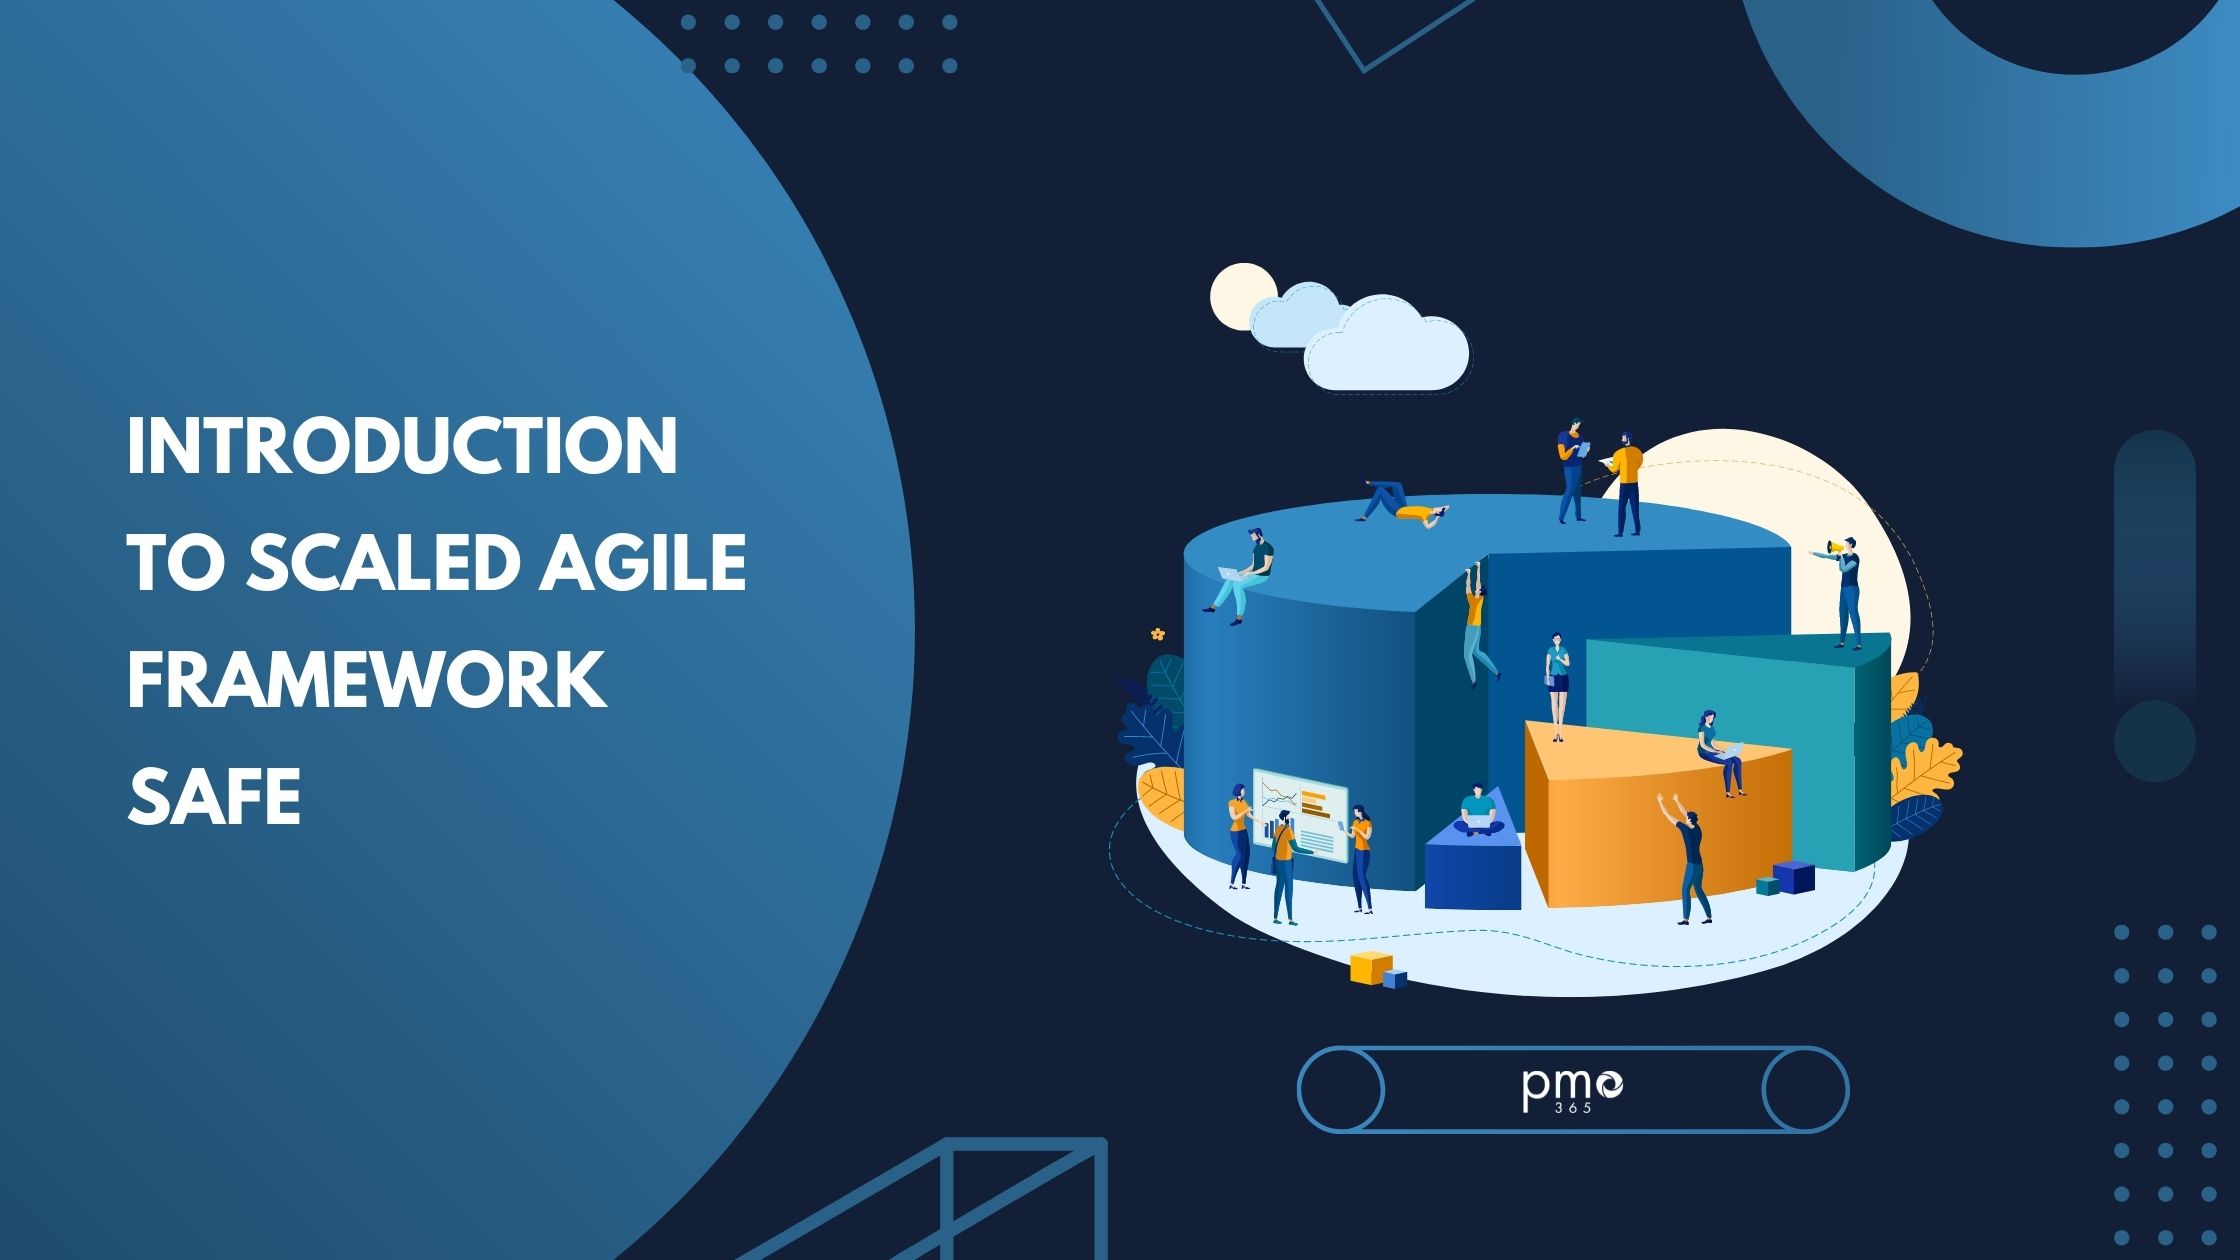 An Introduction to Scaled Agile Framework (SAFe)